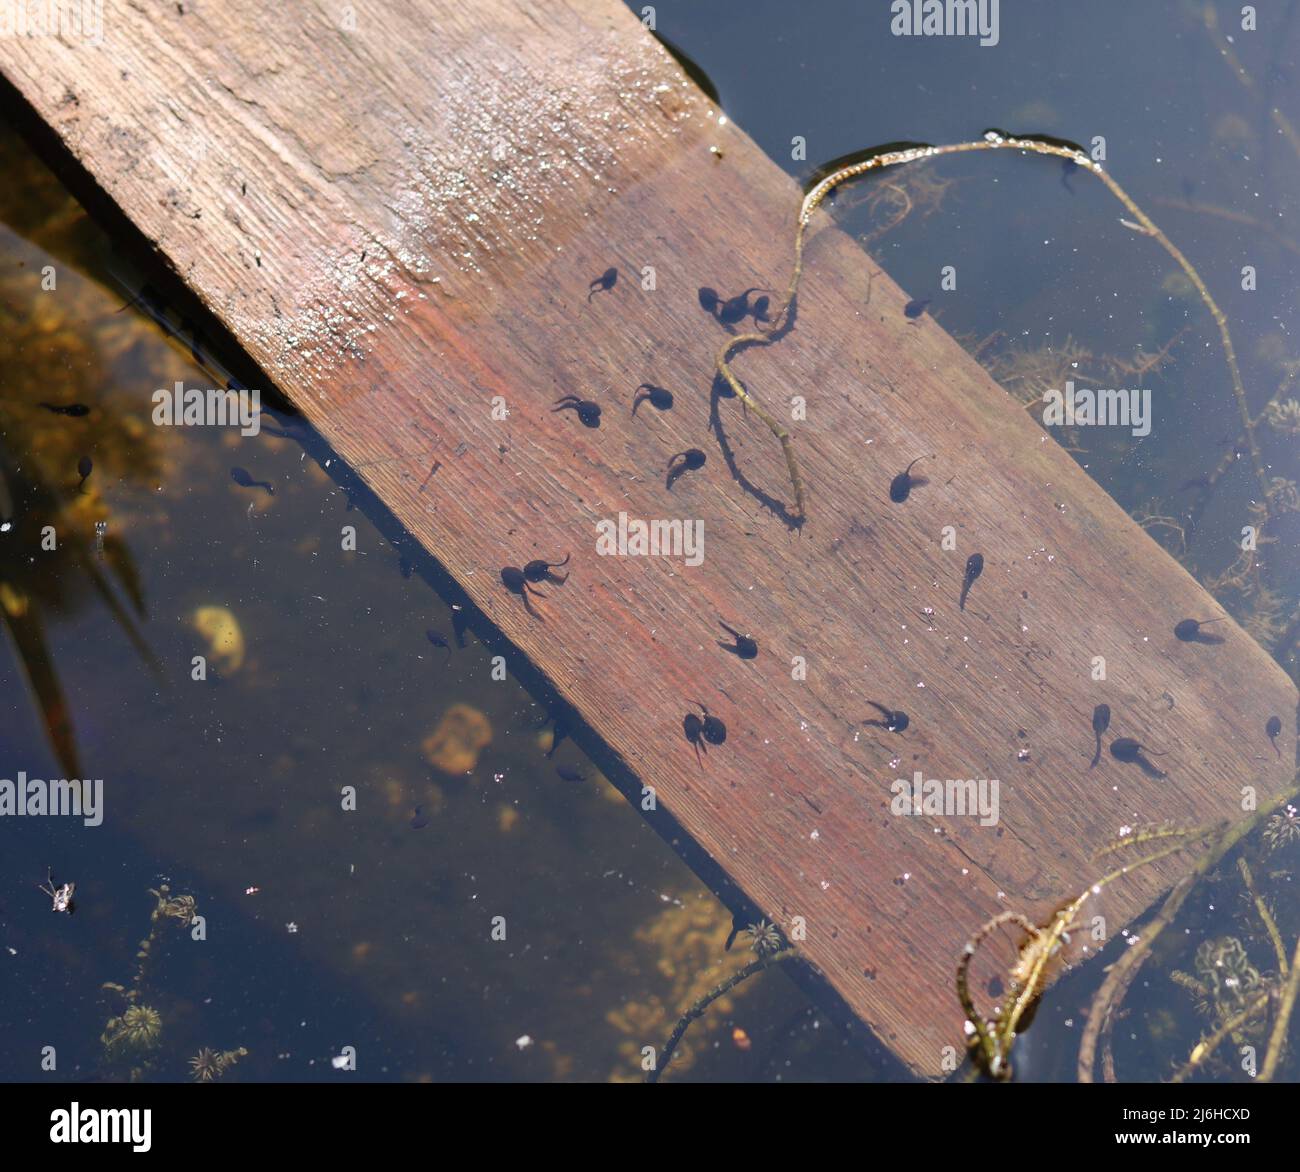 Lots of tadpoles on wooden plank enabling exit from pond Stock Photo